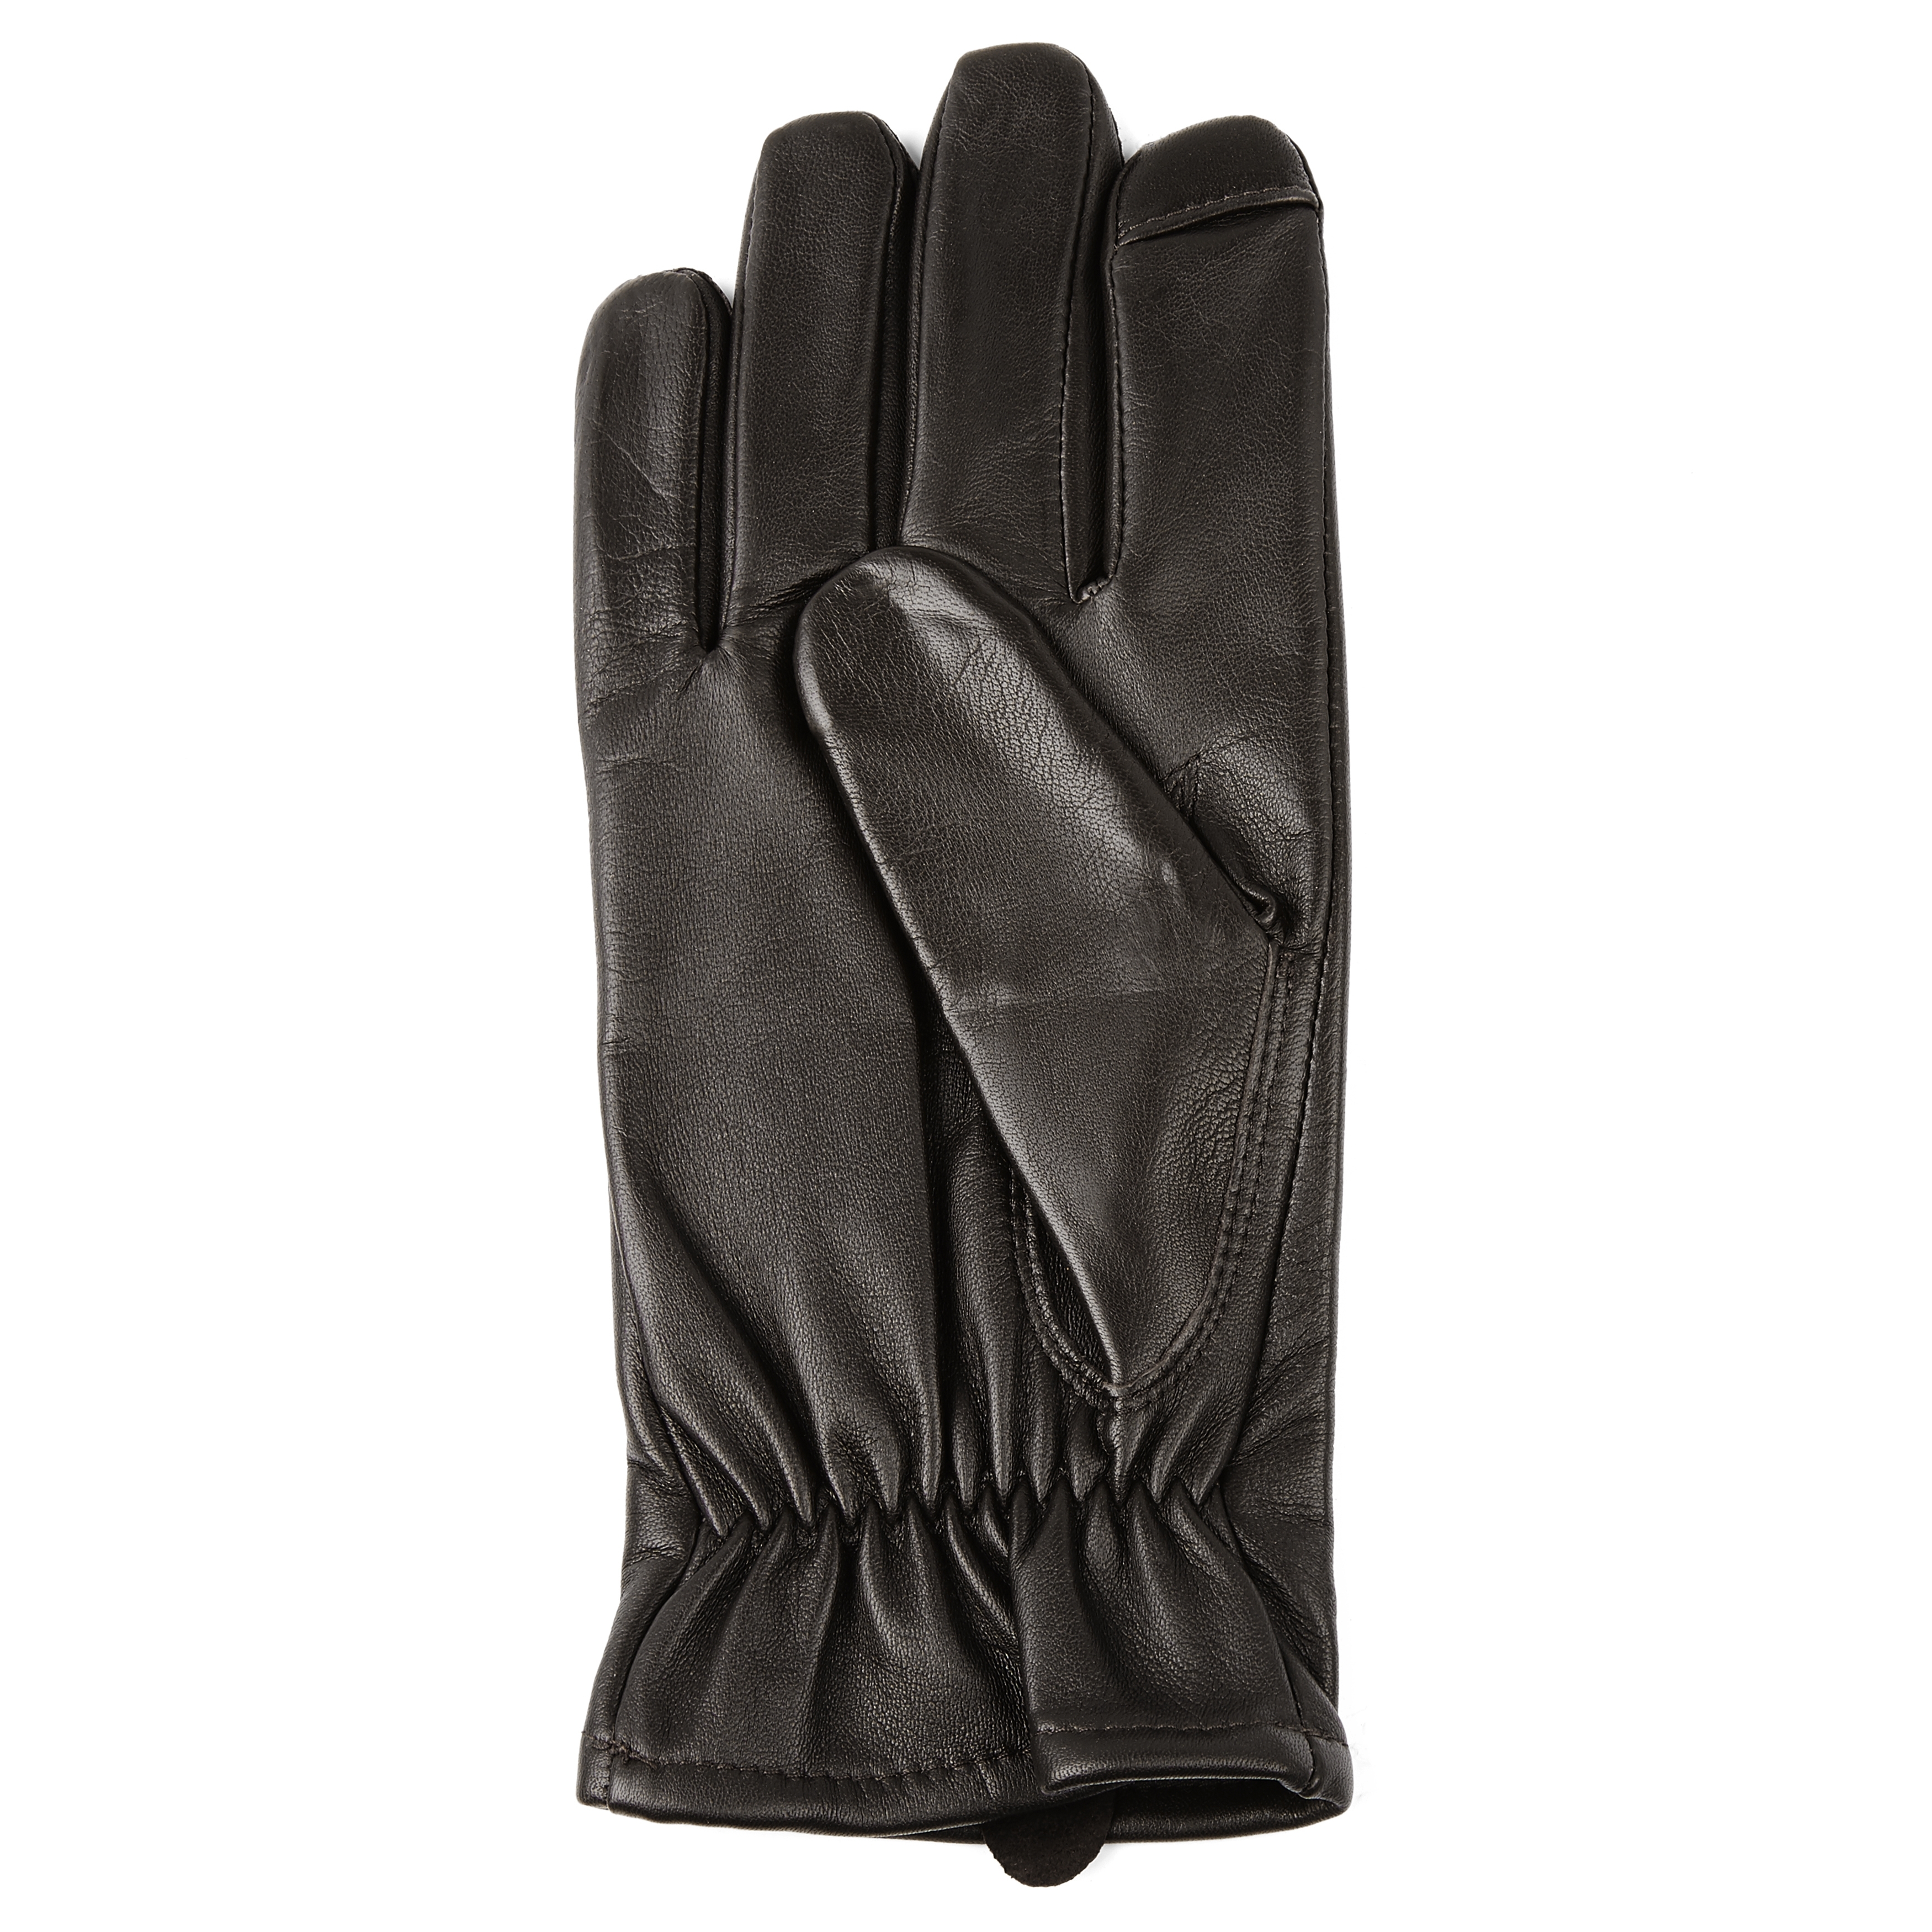 & Hide | Touchscreen | Brown stock! Compatible Dark In leather Sheep Gloves Salt Cuffed